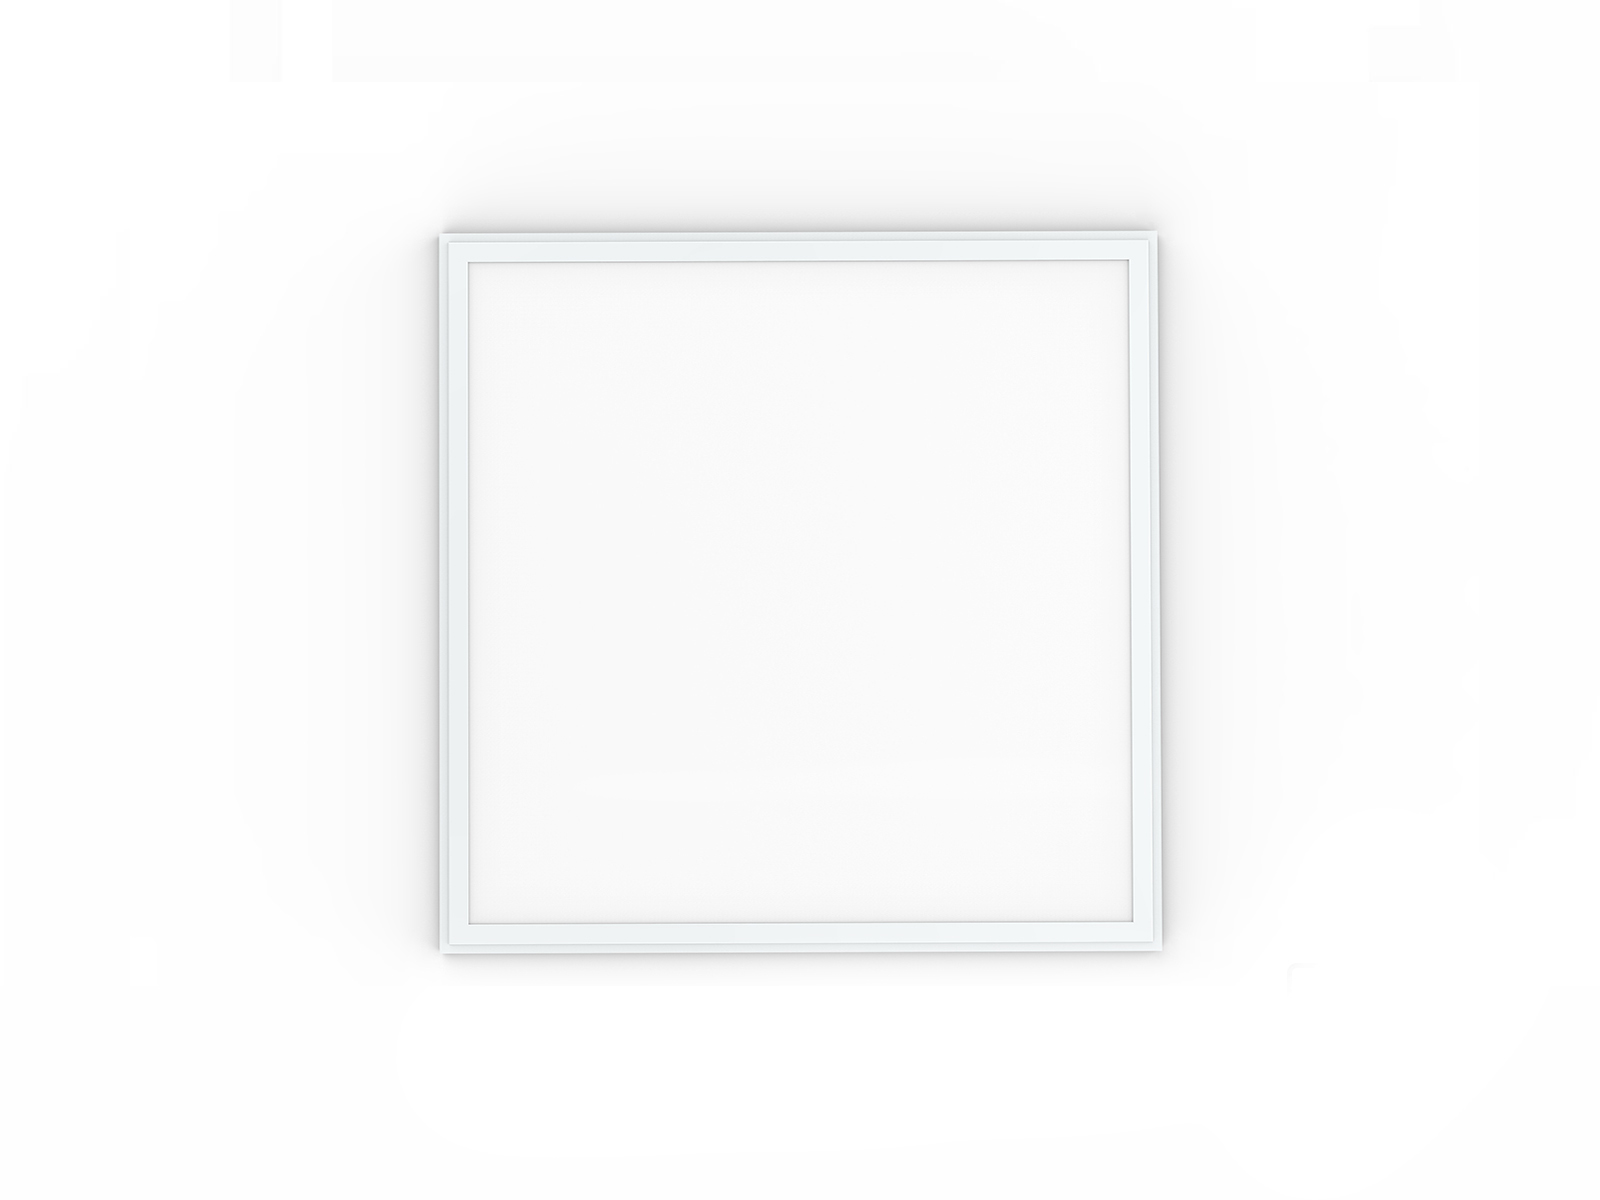 Dimmable 600x600 LED Panel Light